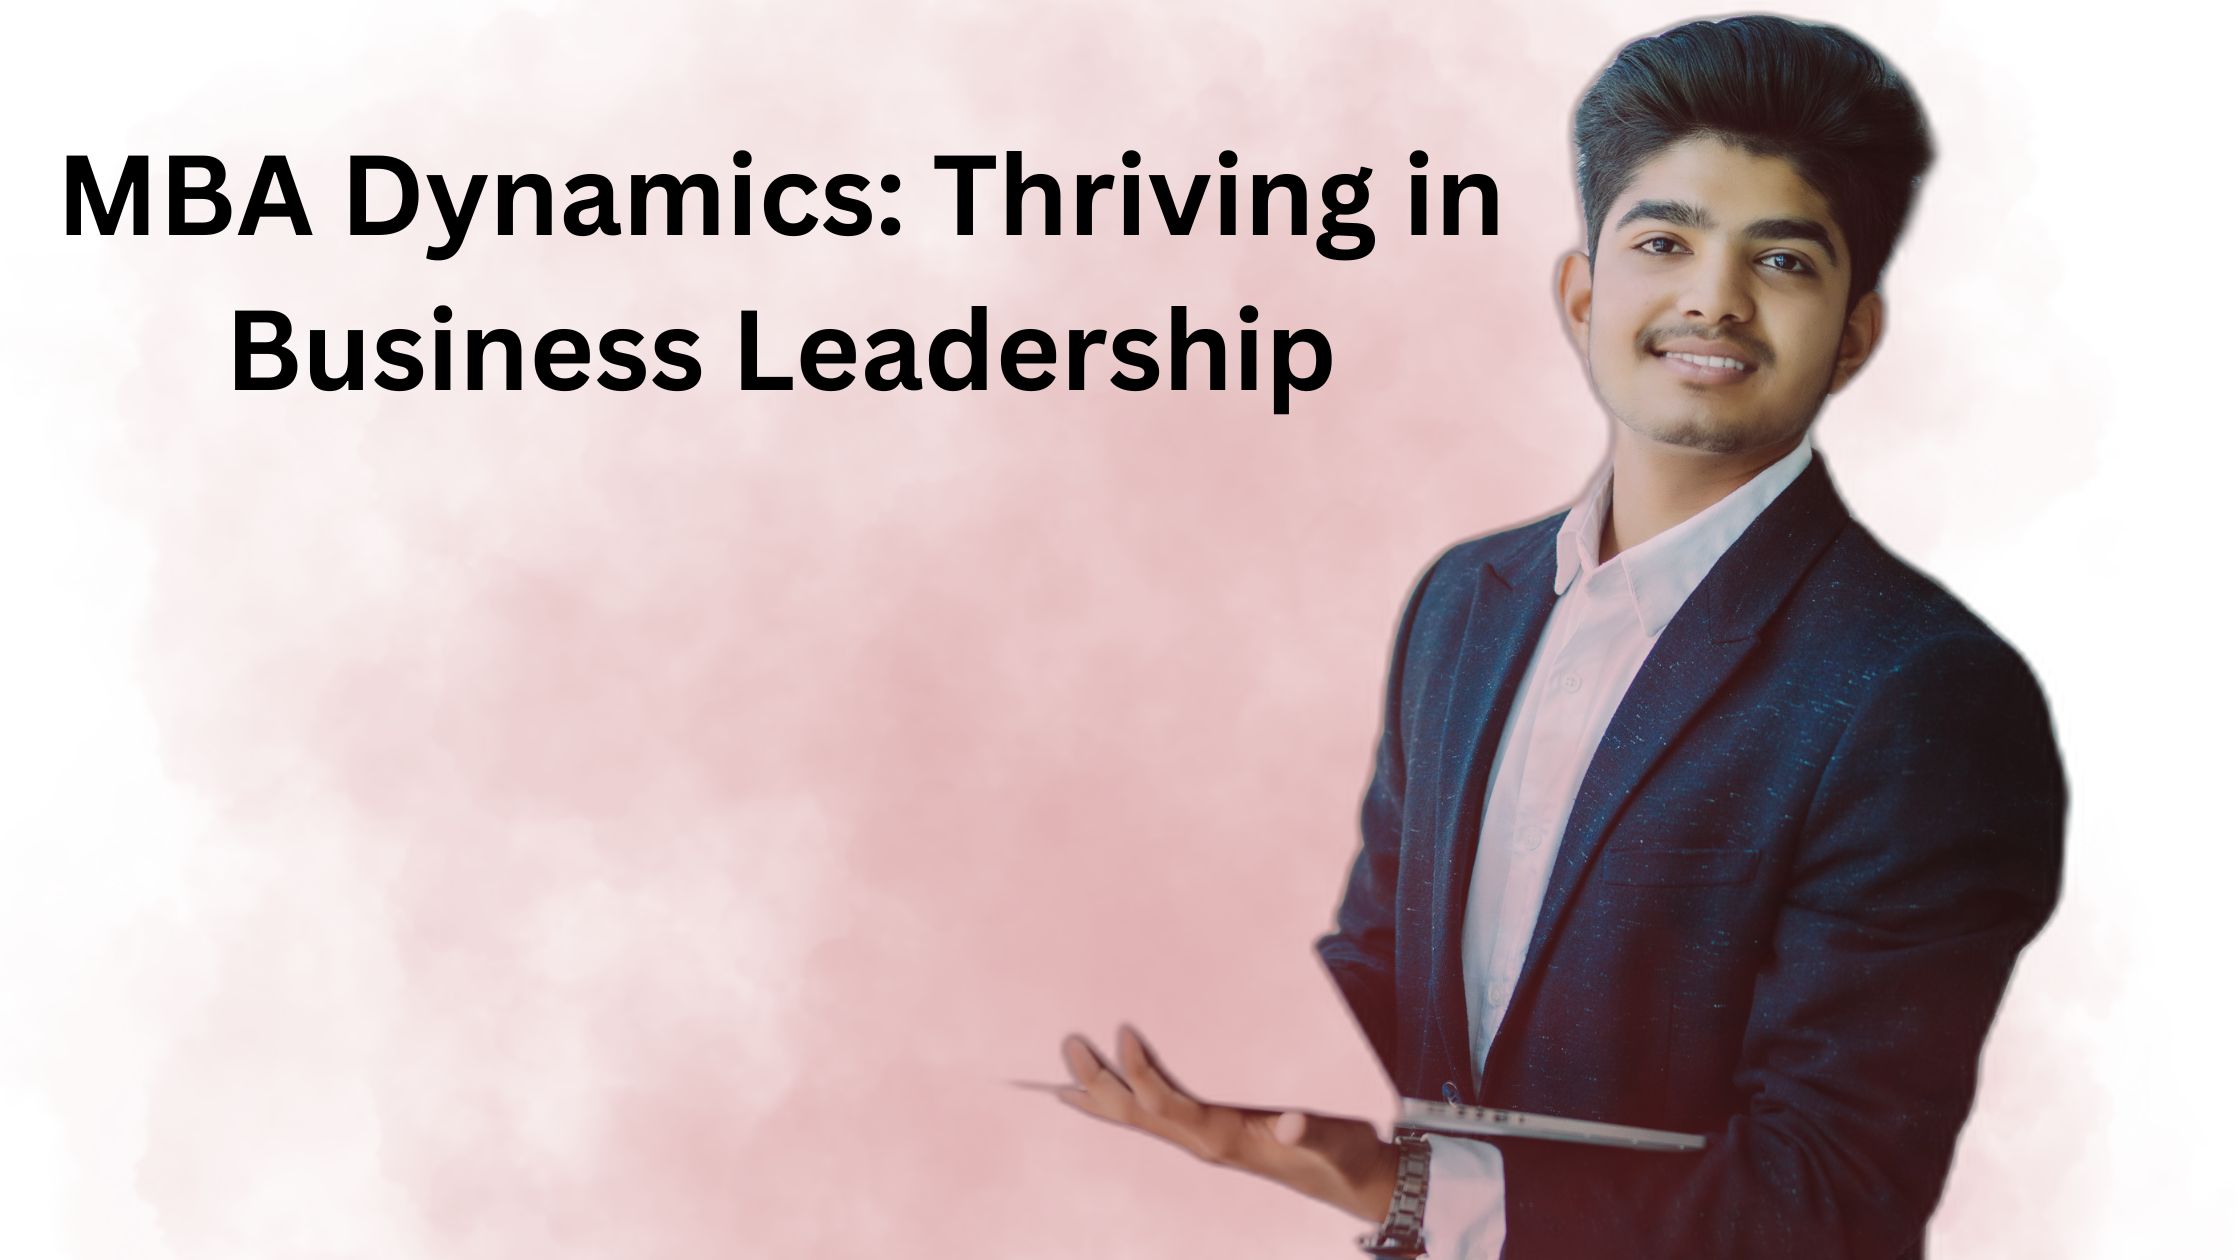 MBA Dynamics: Thriving in Business Leadership